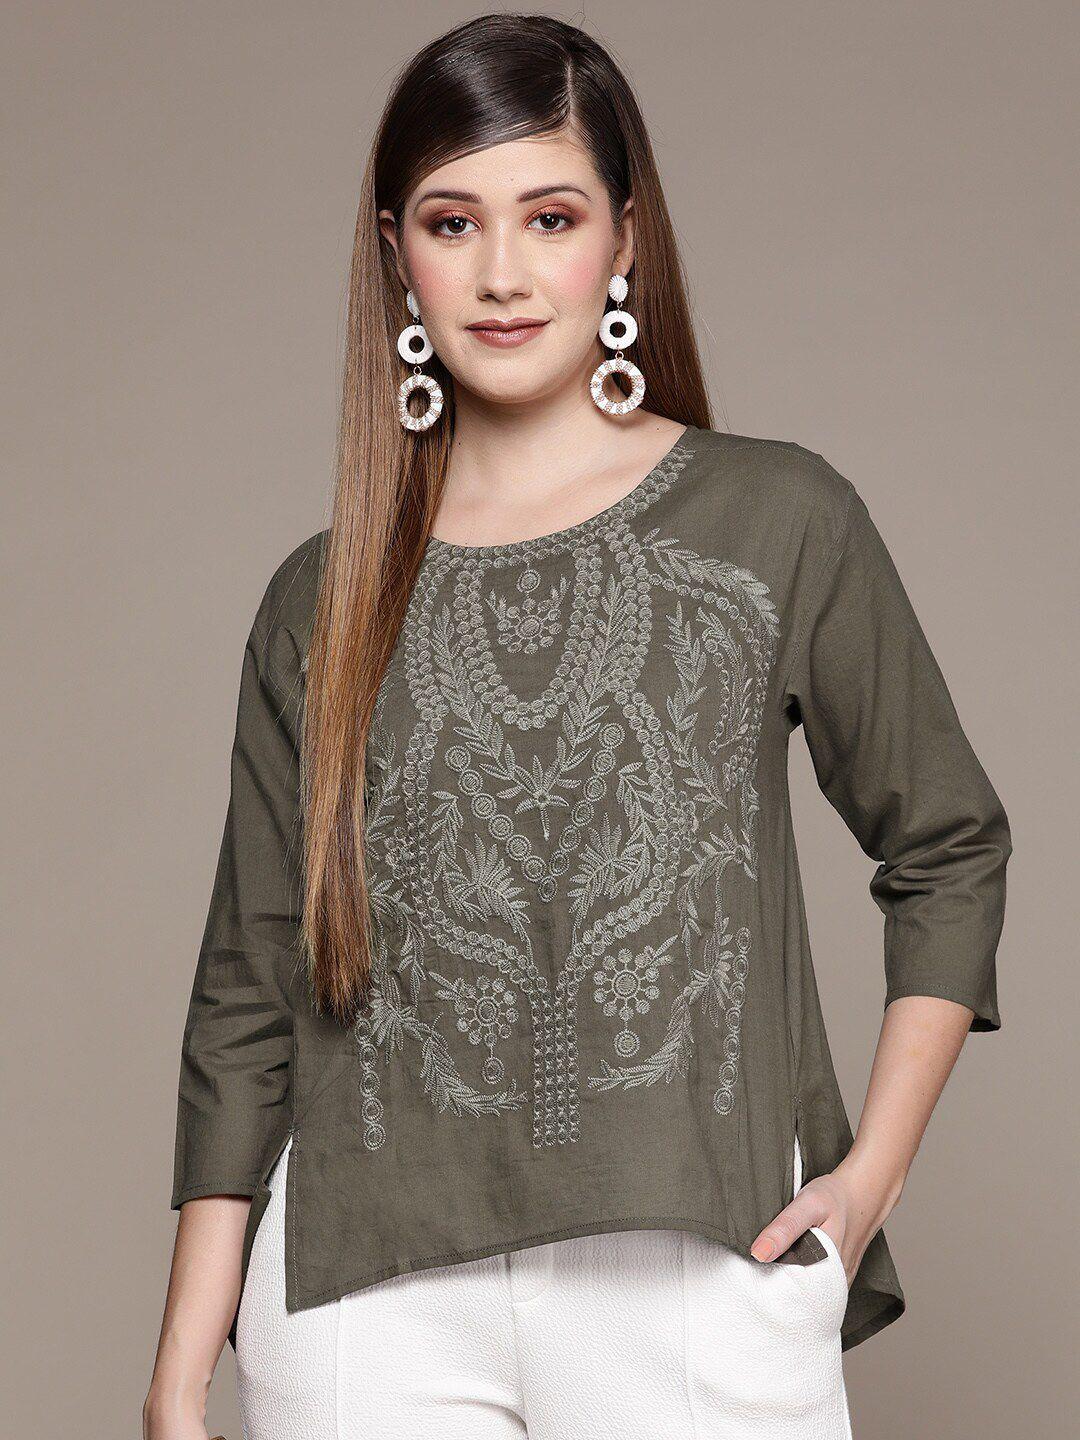 ishin floral embroidered top